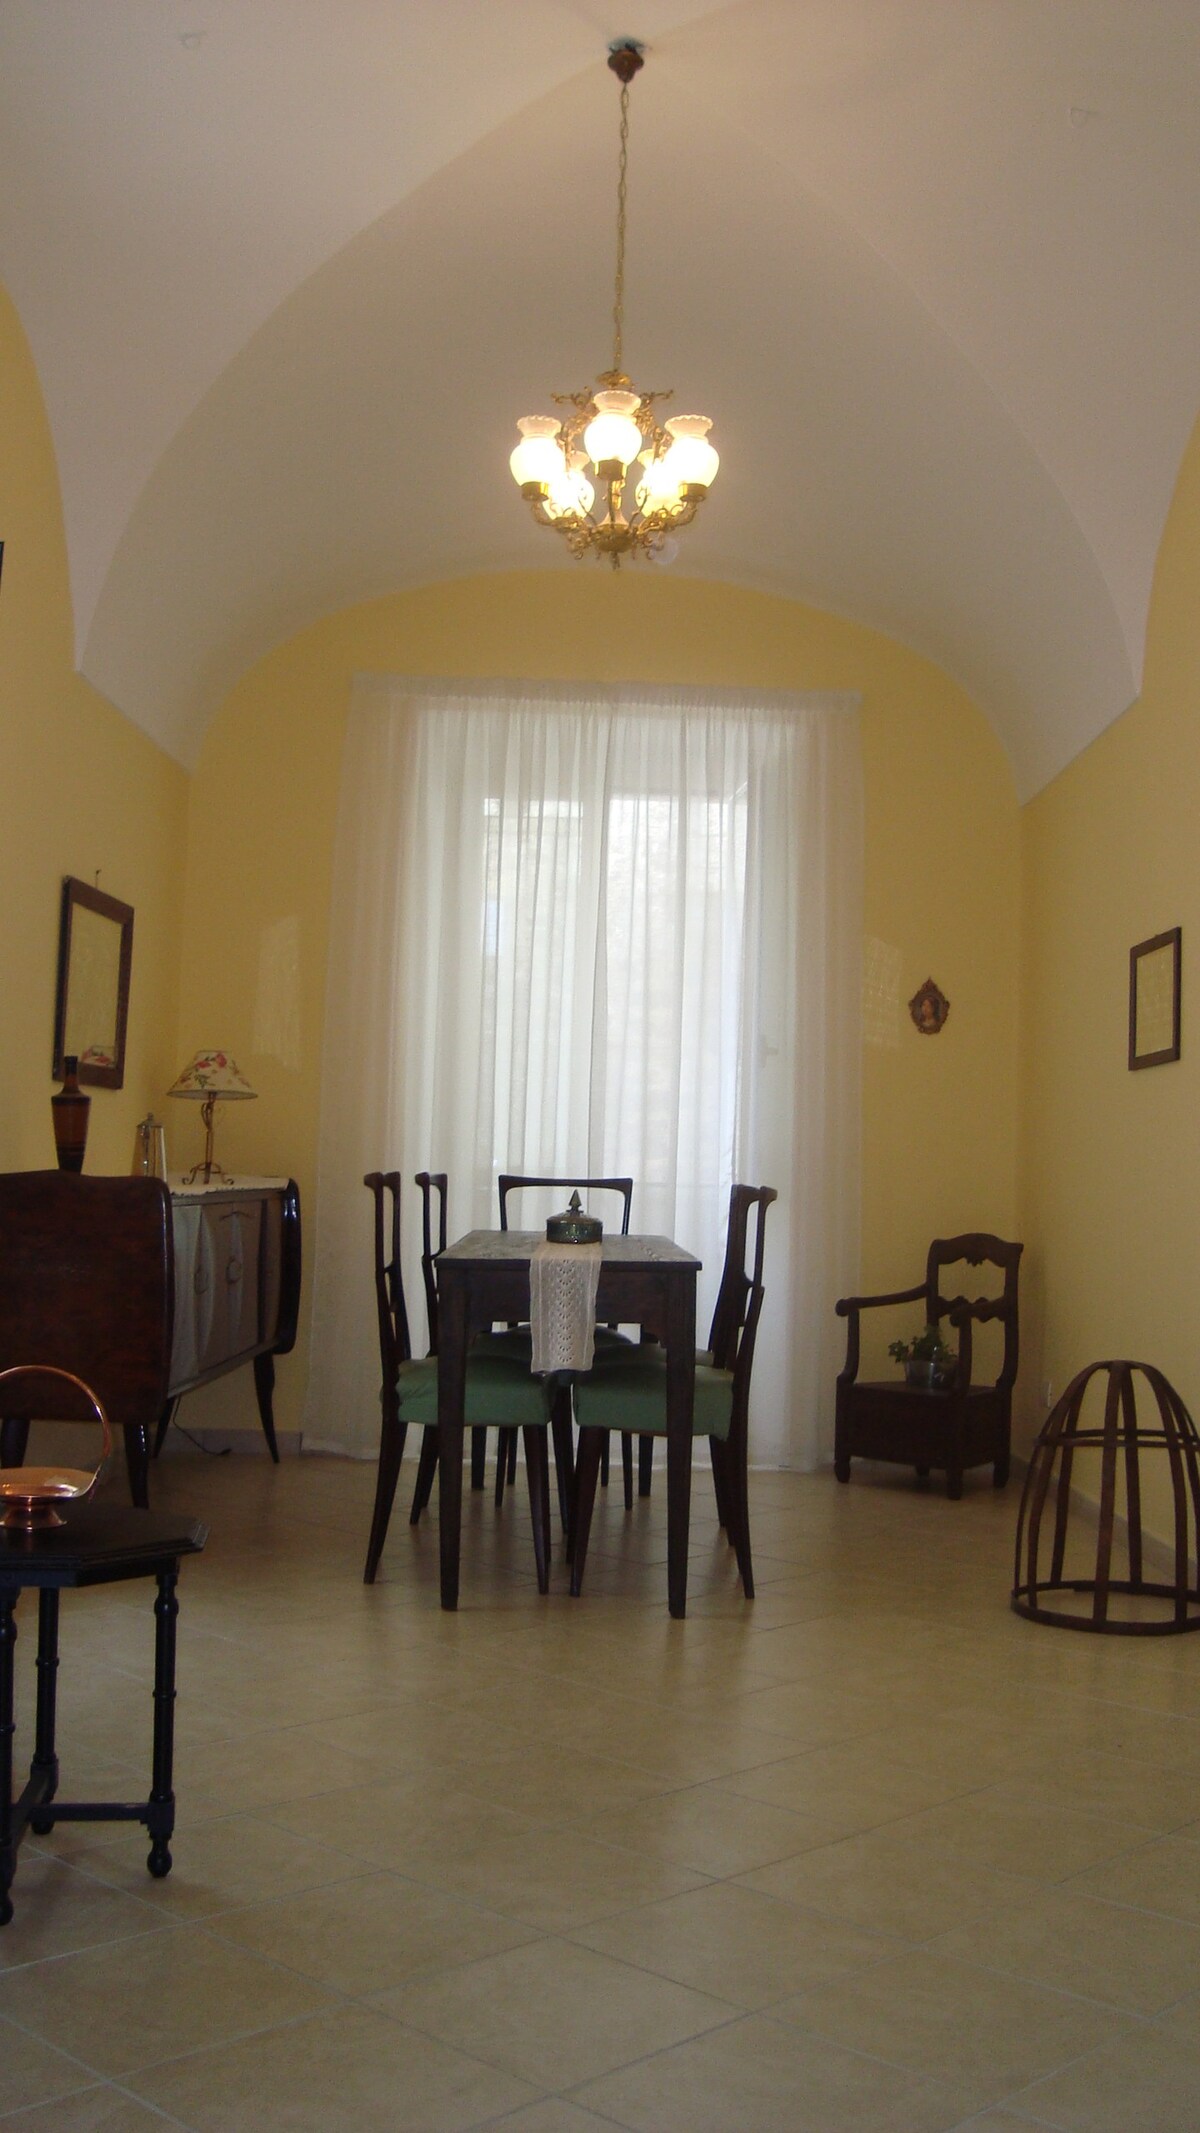 "Casa Lory" guest house and "Gino" flat